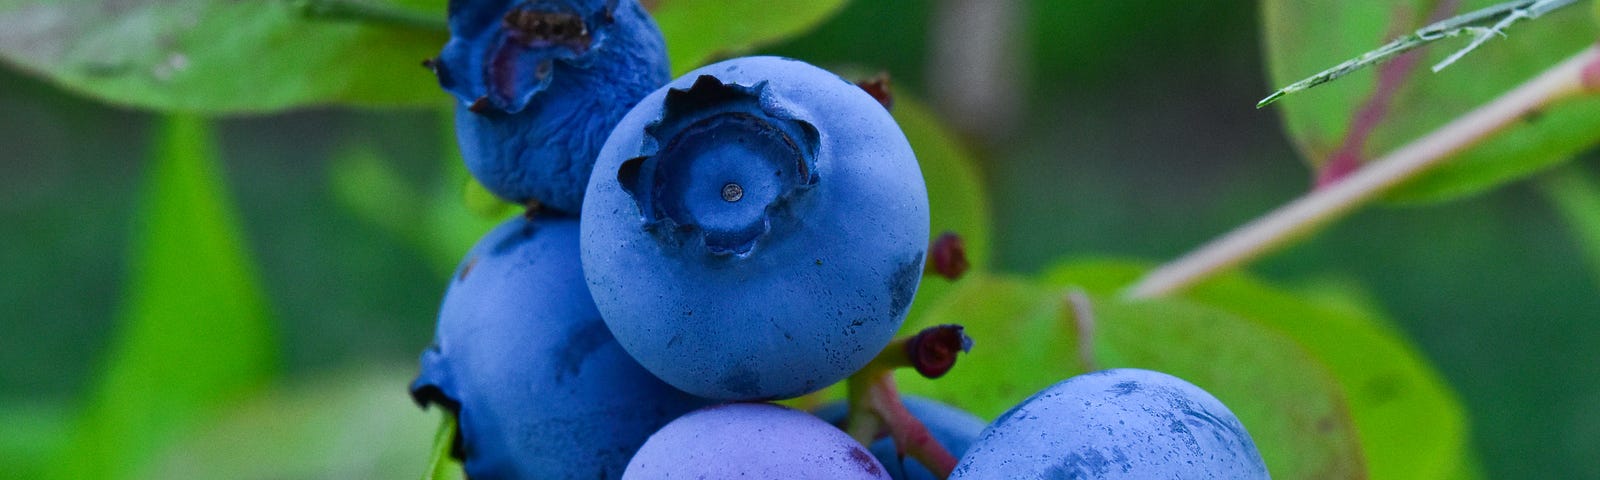 plumb and vibrantly colored blueberries ready to be picked.